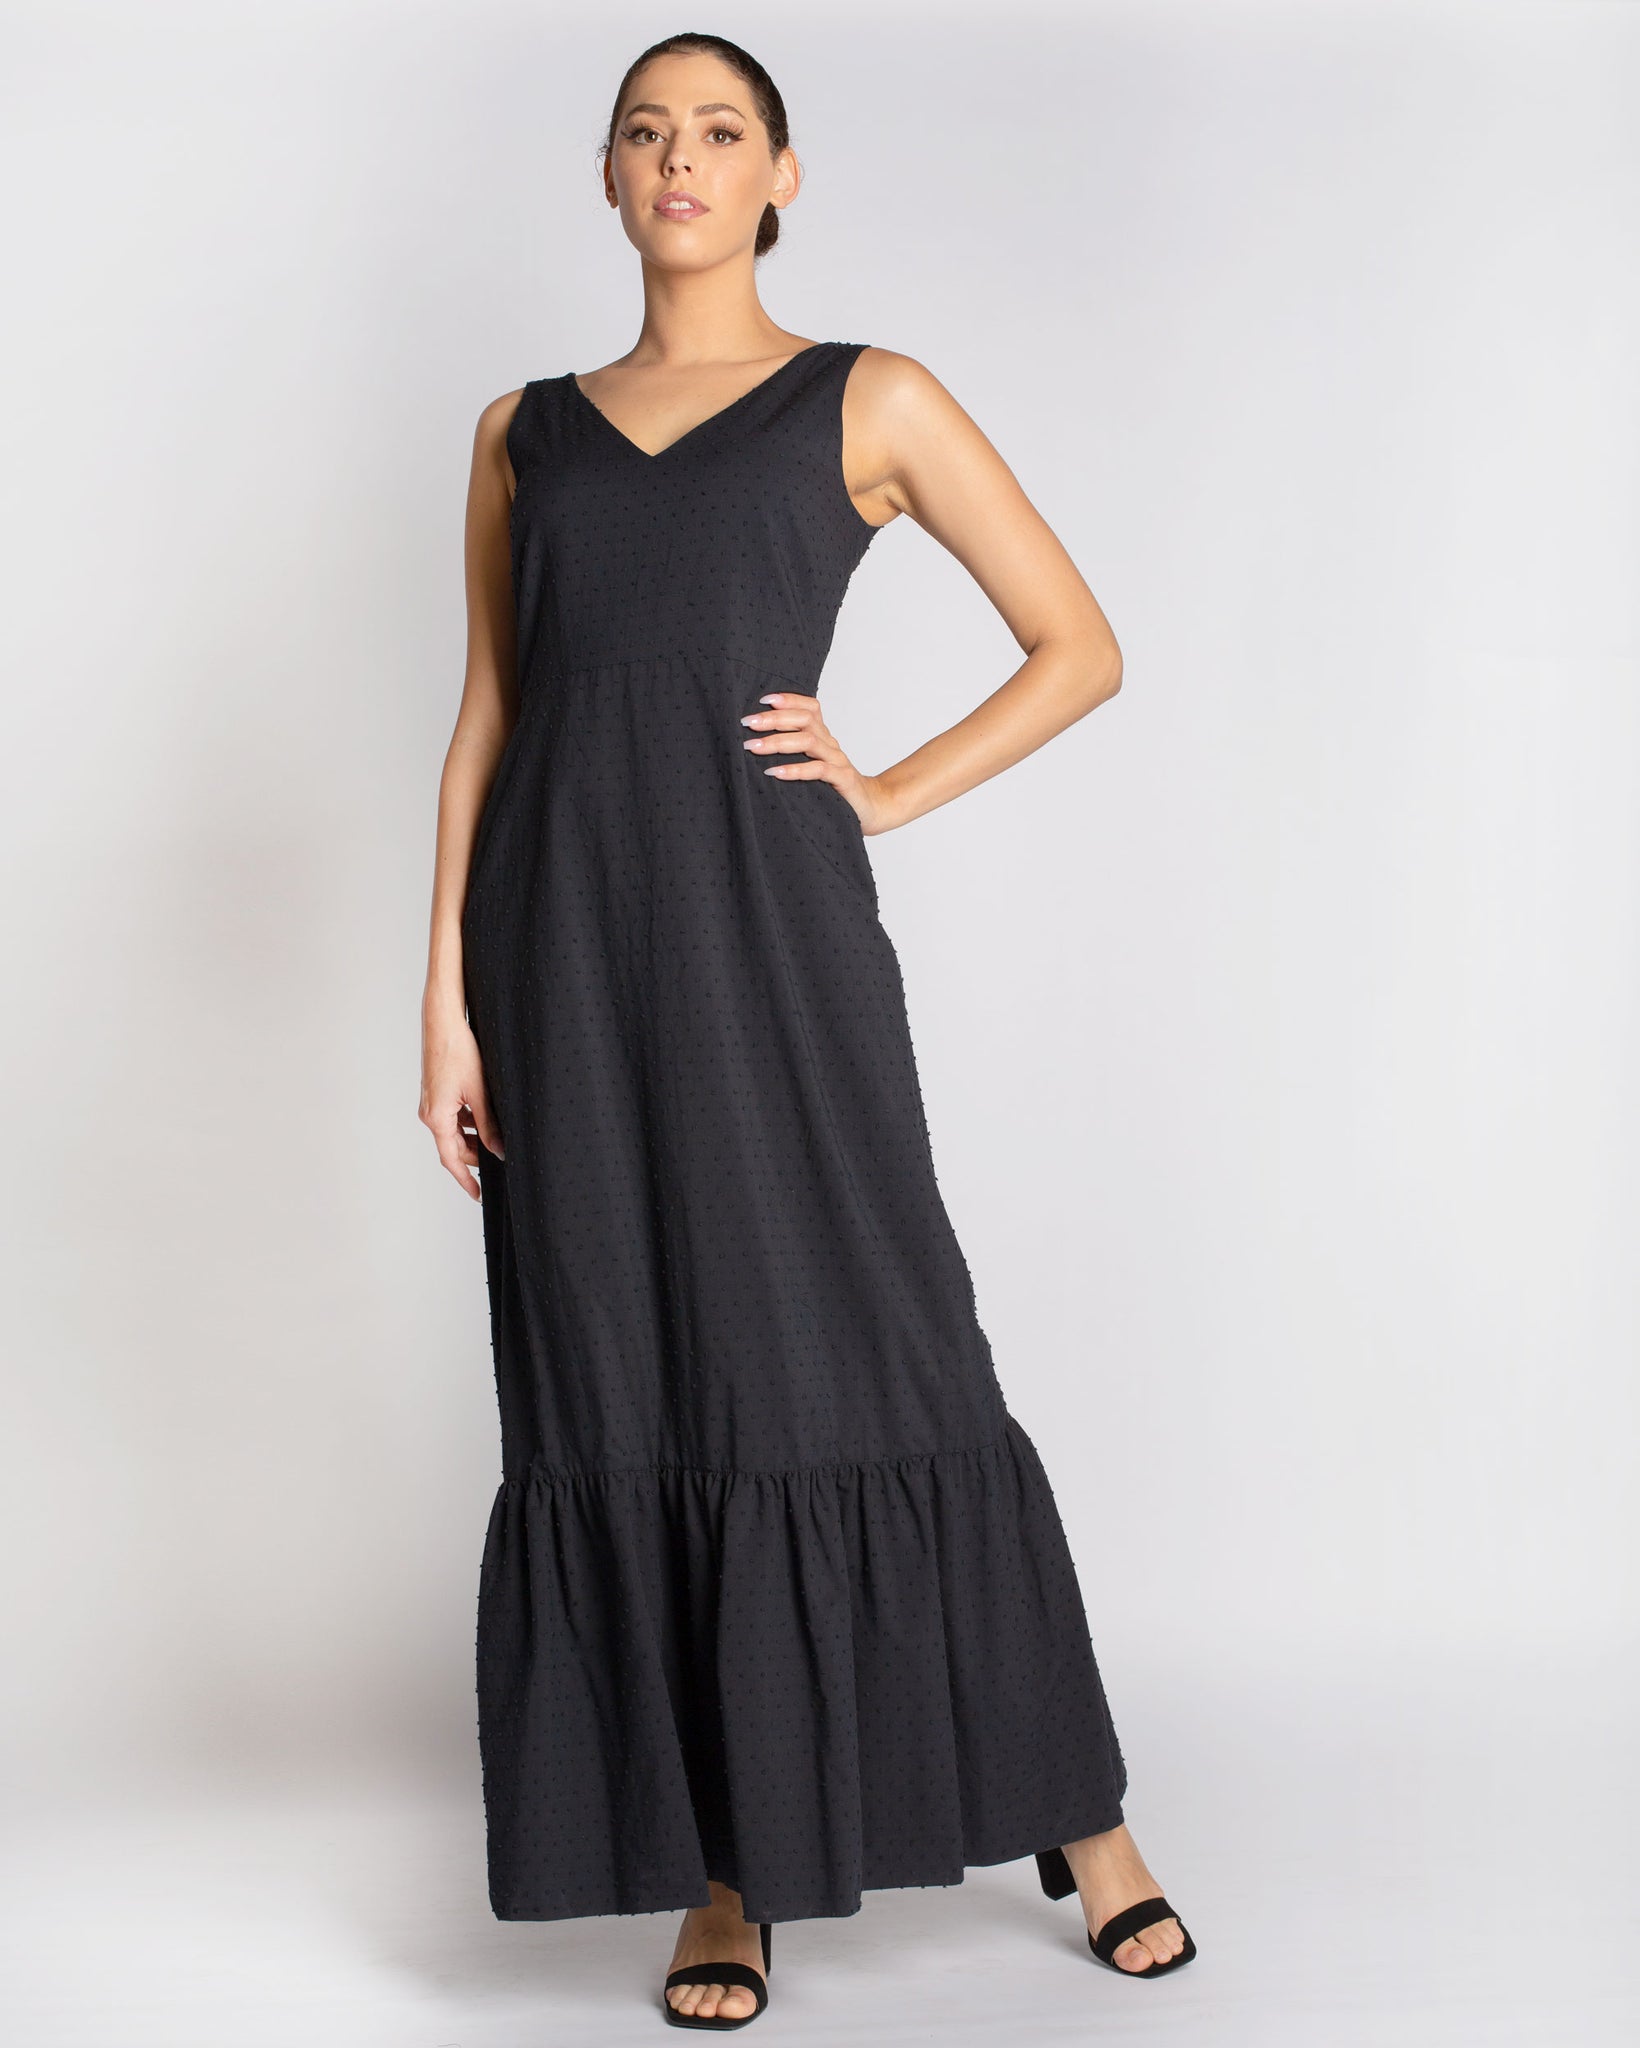 The Venus Gown in Cotton- SALE